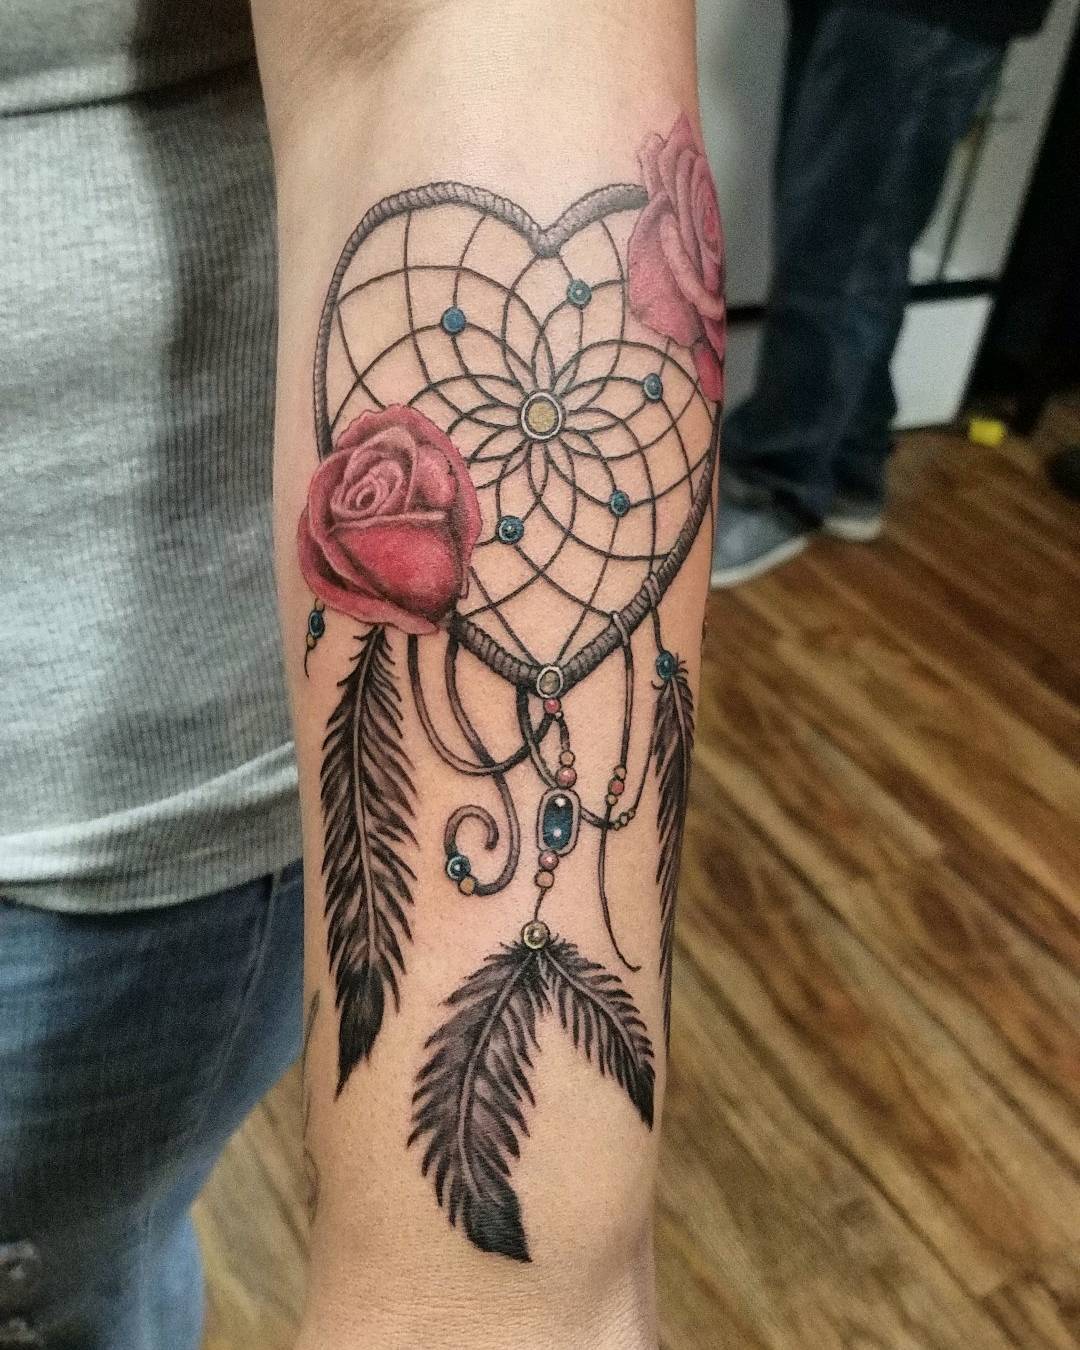 A red rose tattoo is a popular choice for many people. Red roses stand for passion and love, and they are often used to show appreciation. So, let's show your love of dreamcatchers with this tattoo design.